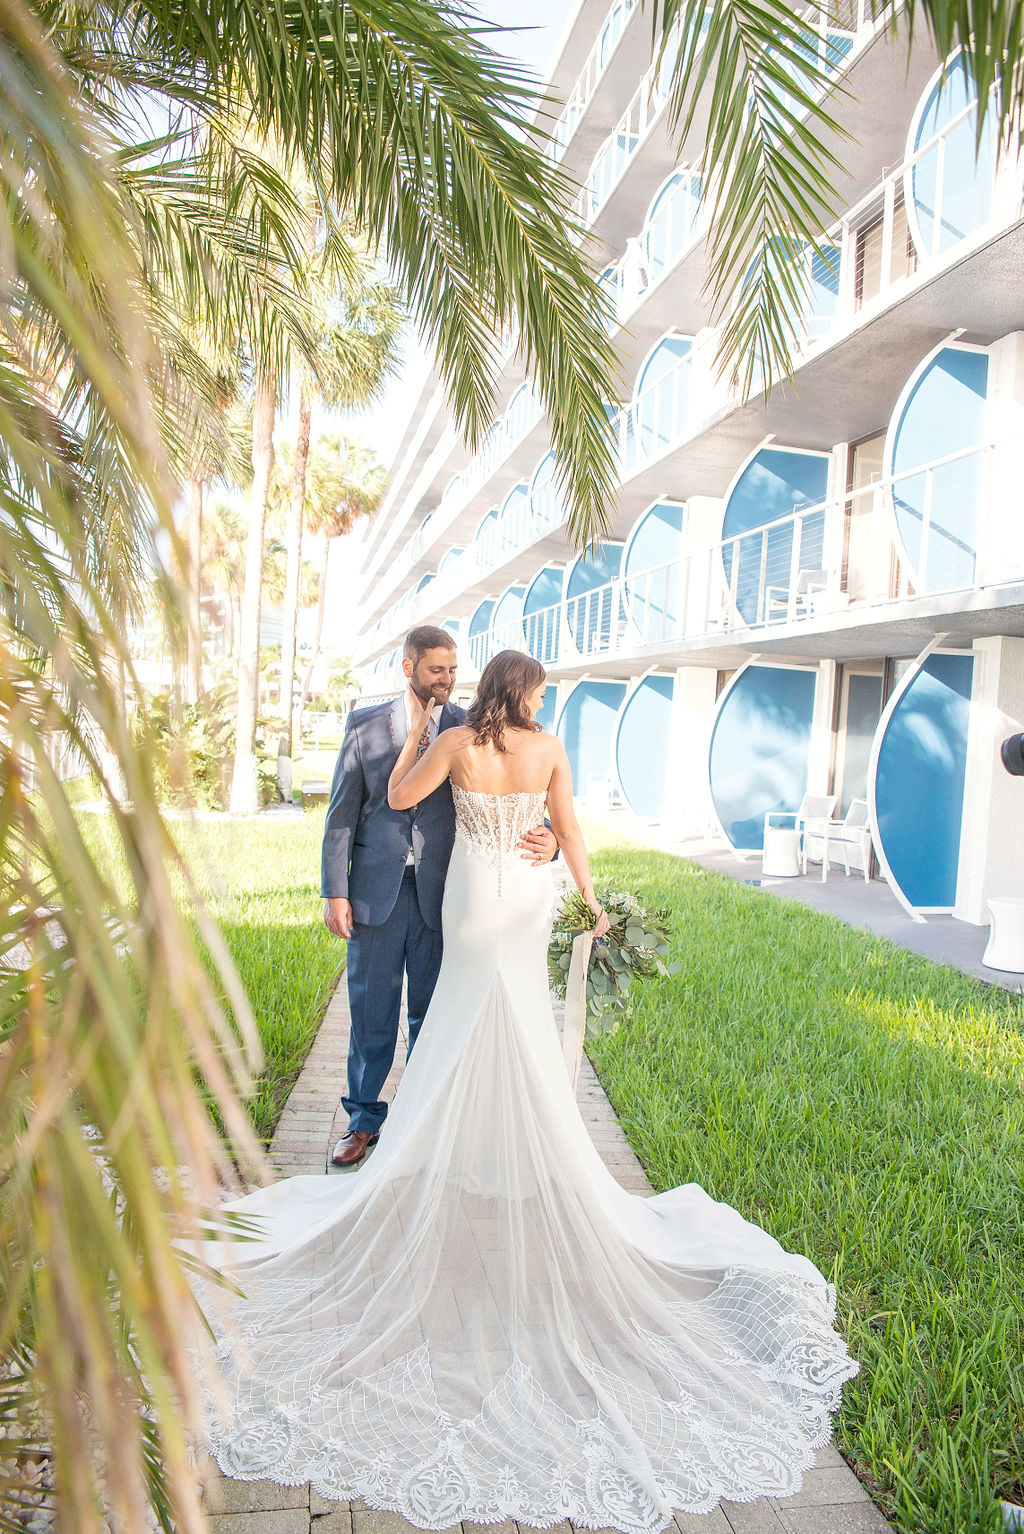 Florida Outdoor Bride and Groom Wedding Portrait, Bride in Strapless Illusion and Lace Bodice Wedding Dress with Tulle and Lace Skirt | Tampa Wedding Photographer Kristen Marie Photography | Waterfront Tampa Venue The Godfrey